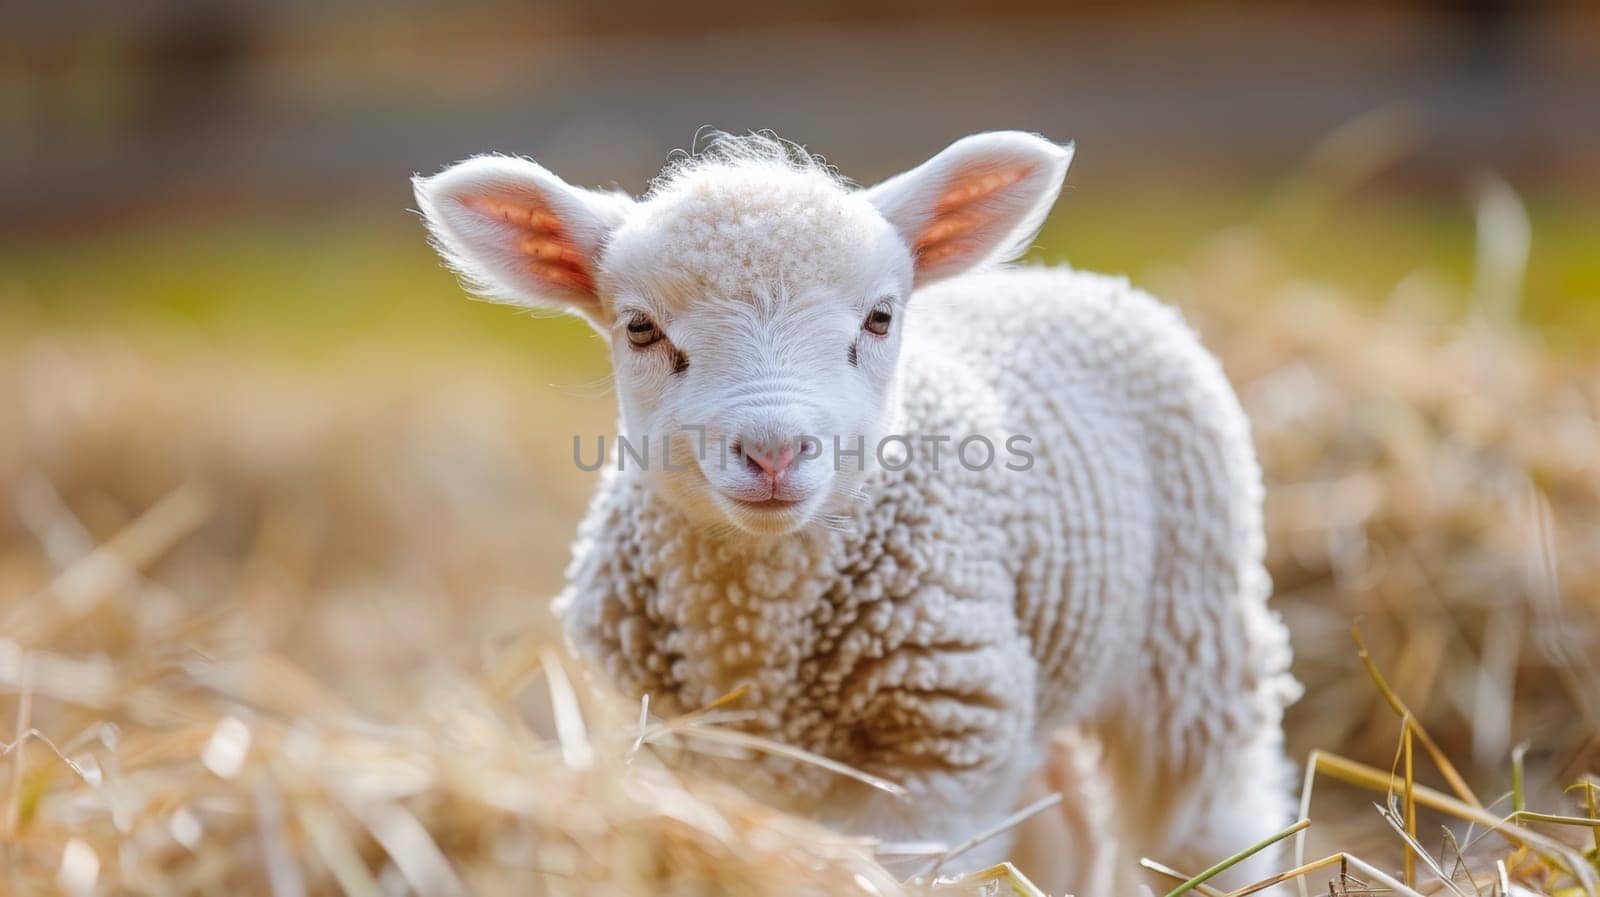 A baby lamb standing in a field of hay with grass